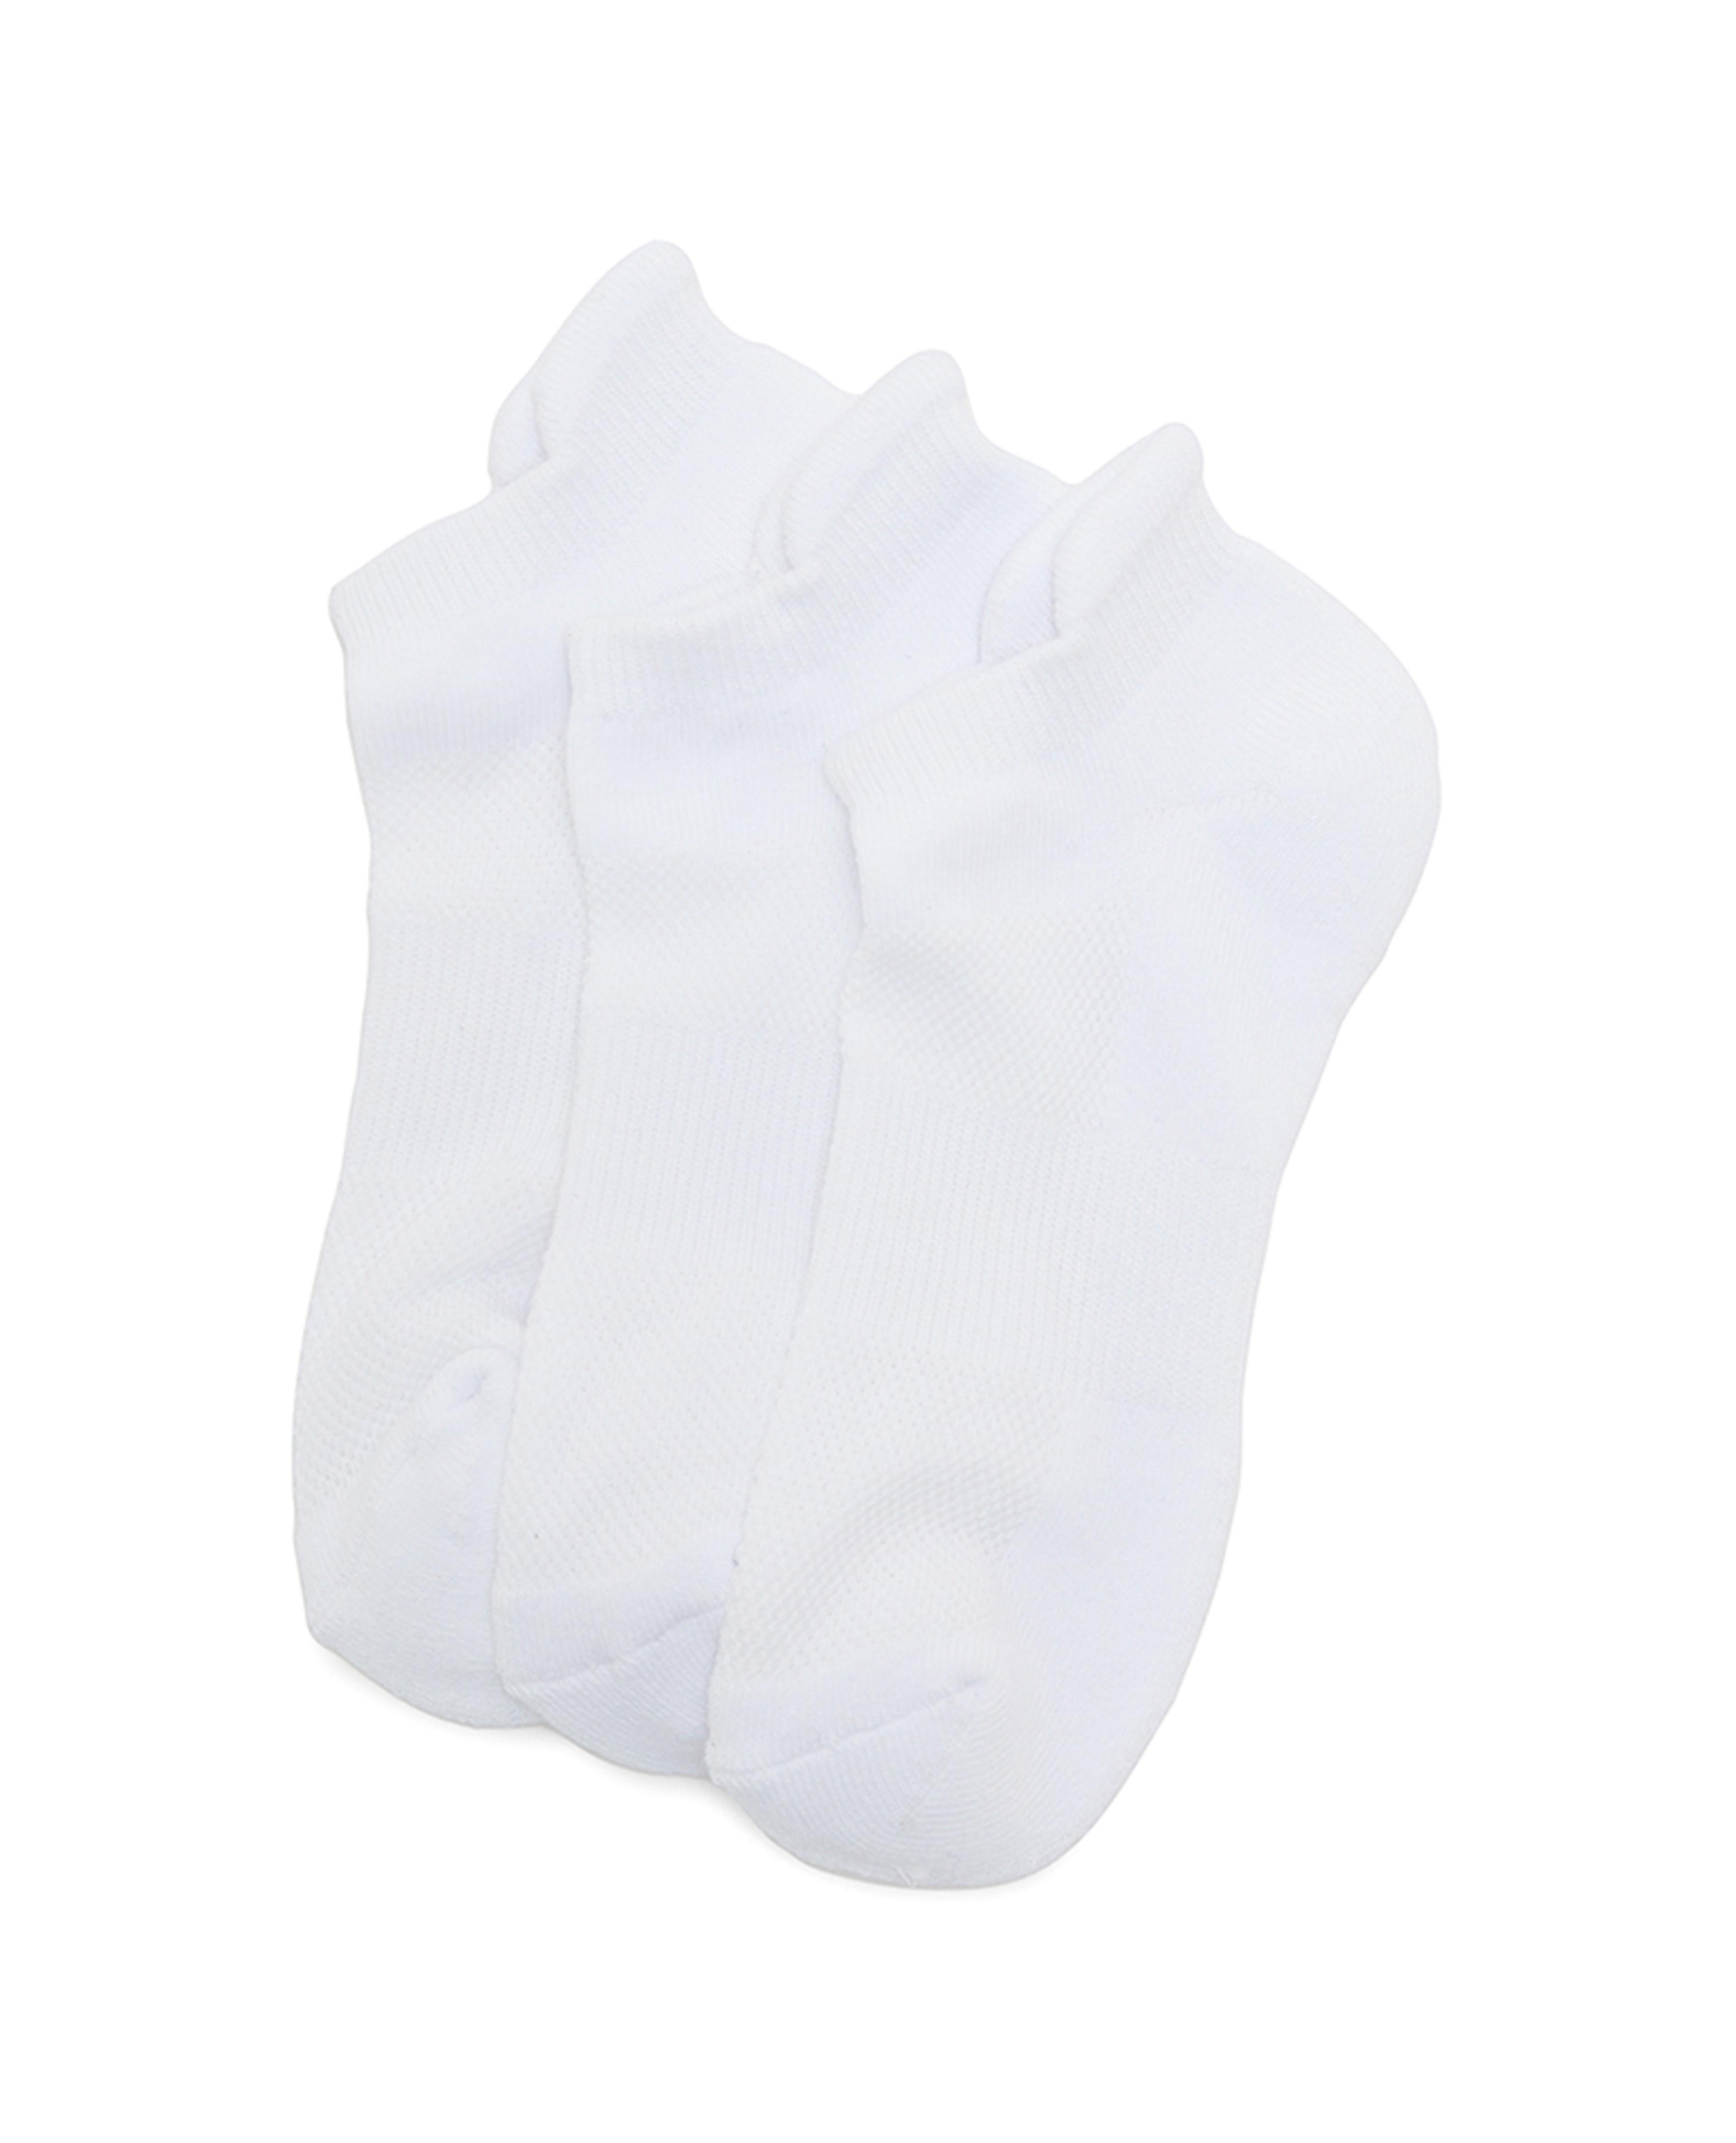 Pack of 3 Solid Ankle Socks